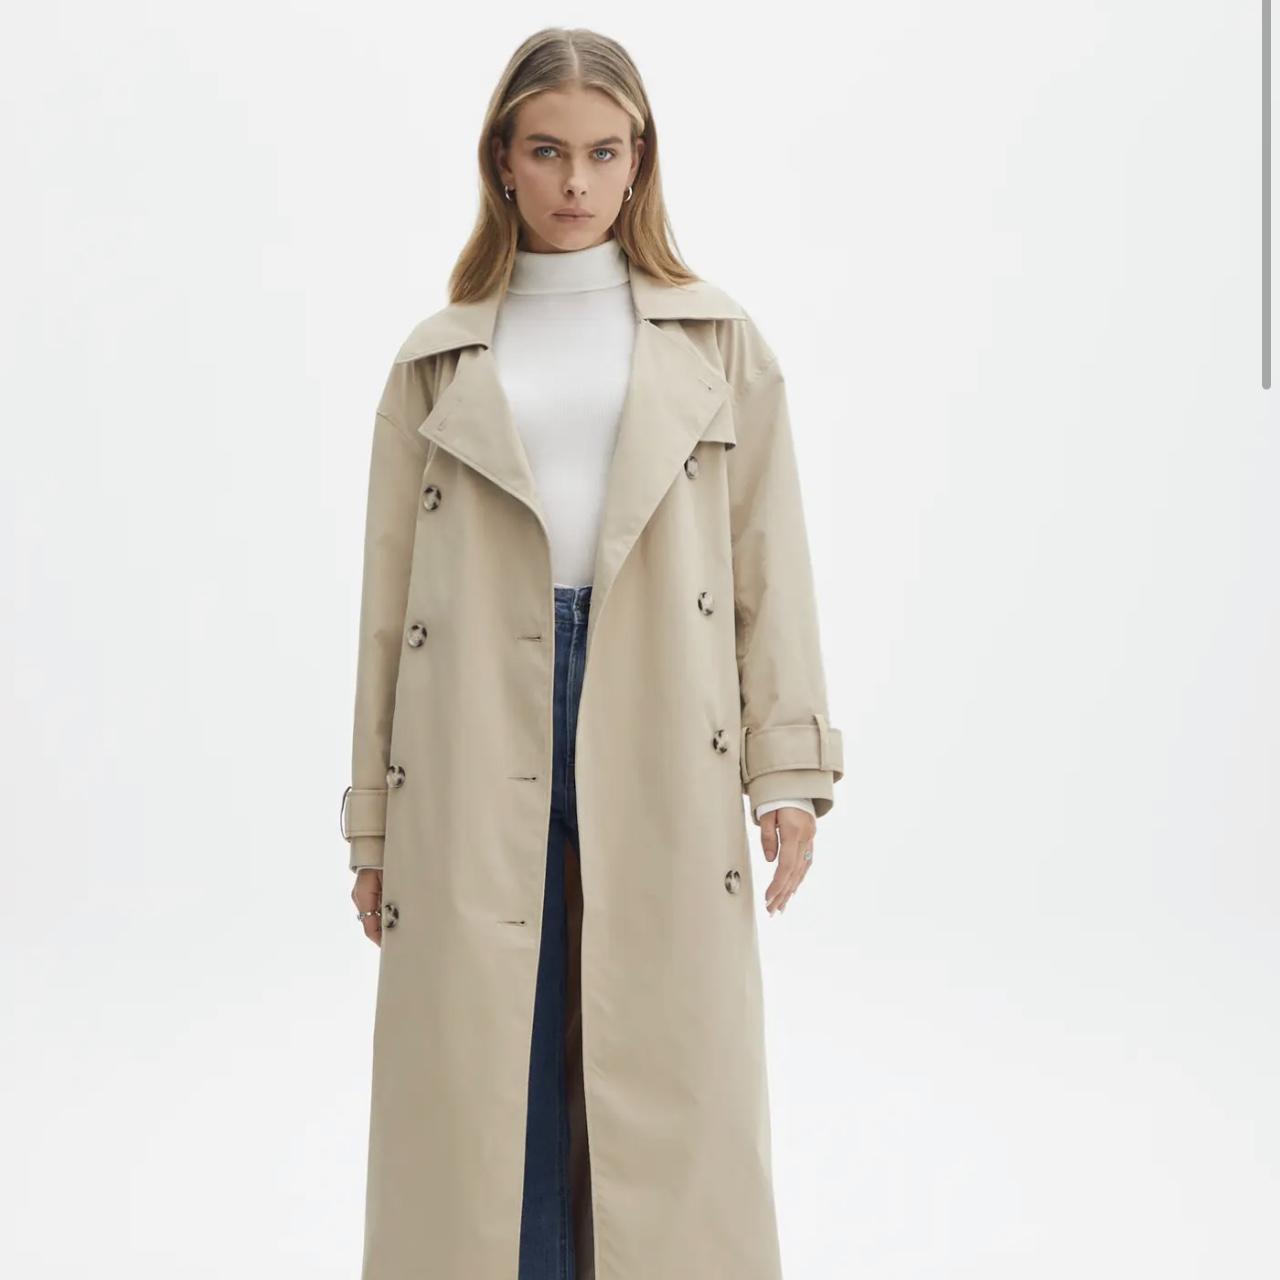 Glassons trench coat In store for $99 Selling for... - Depop